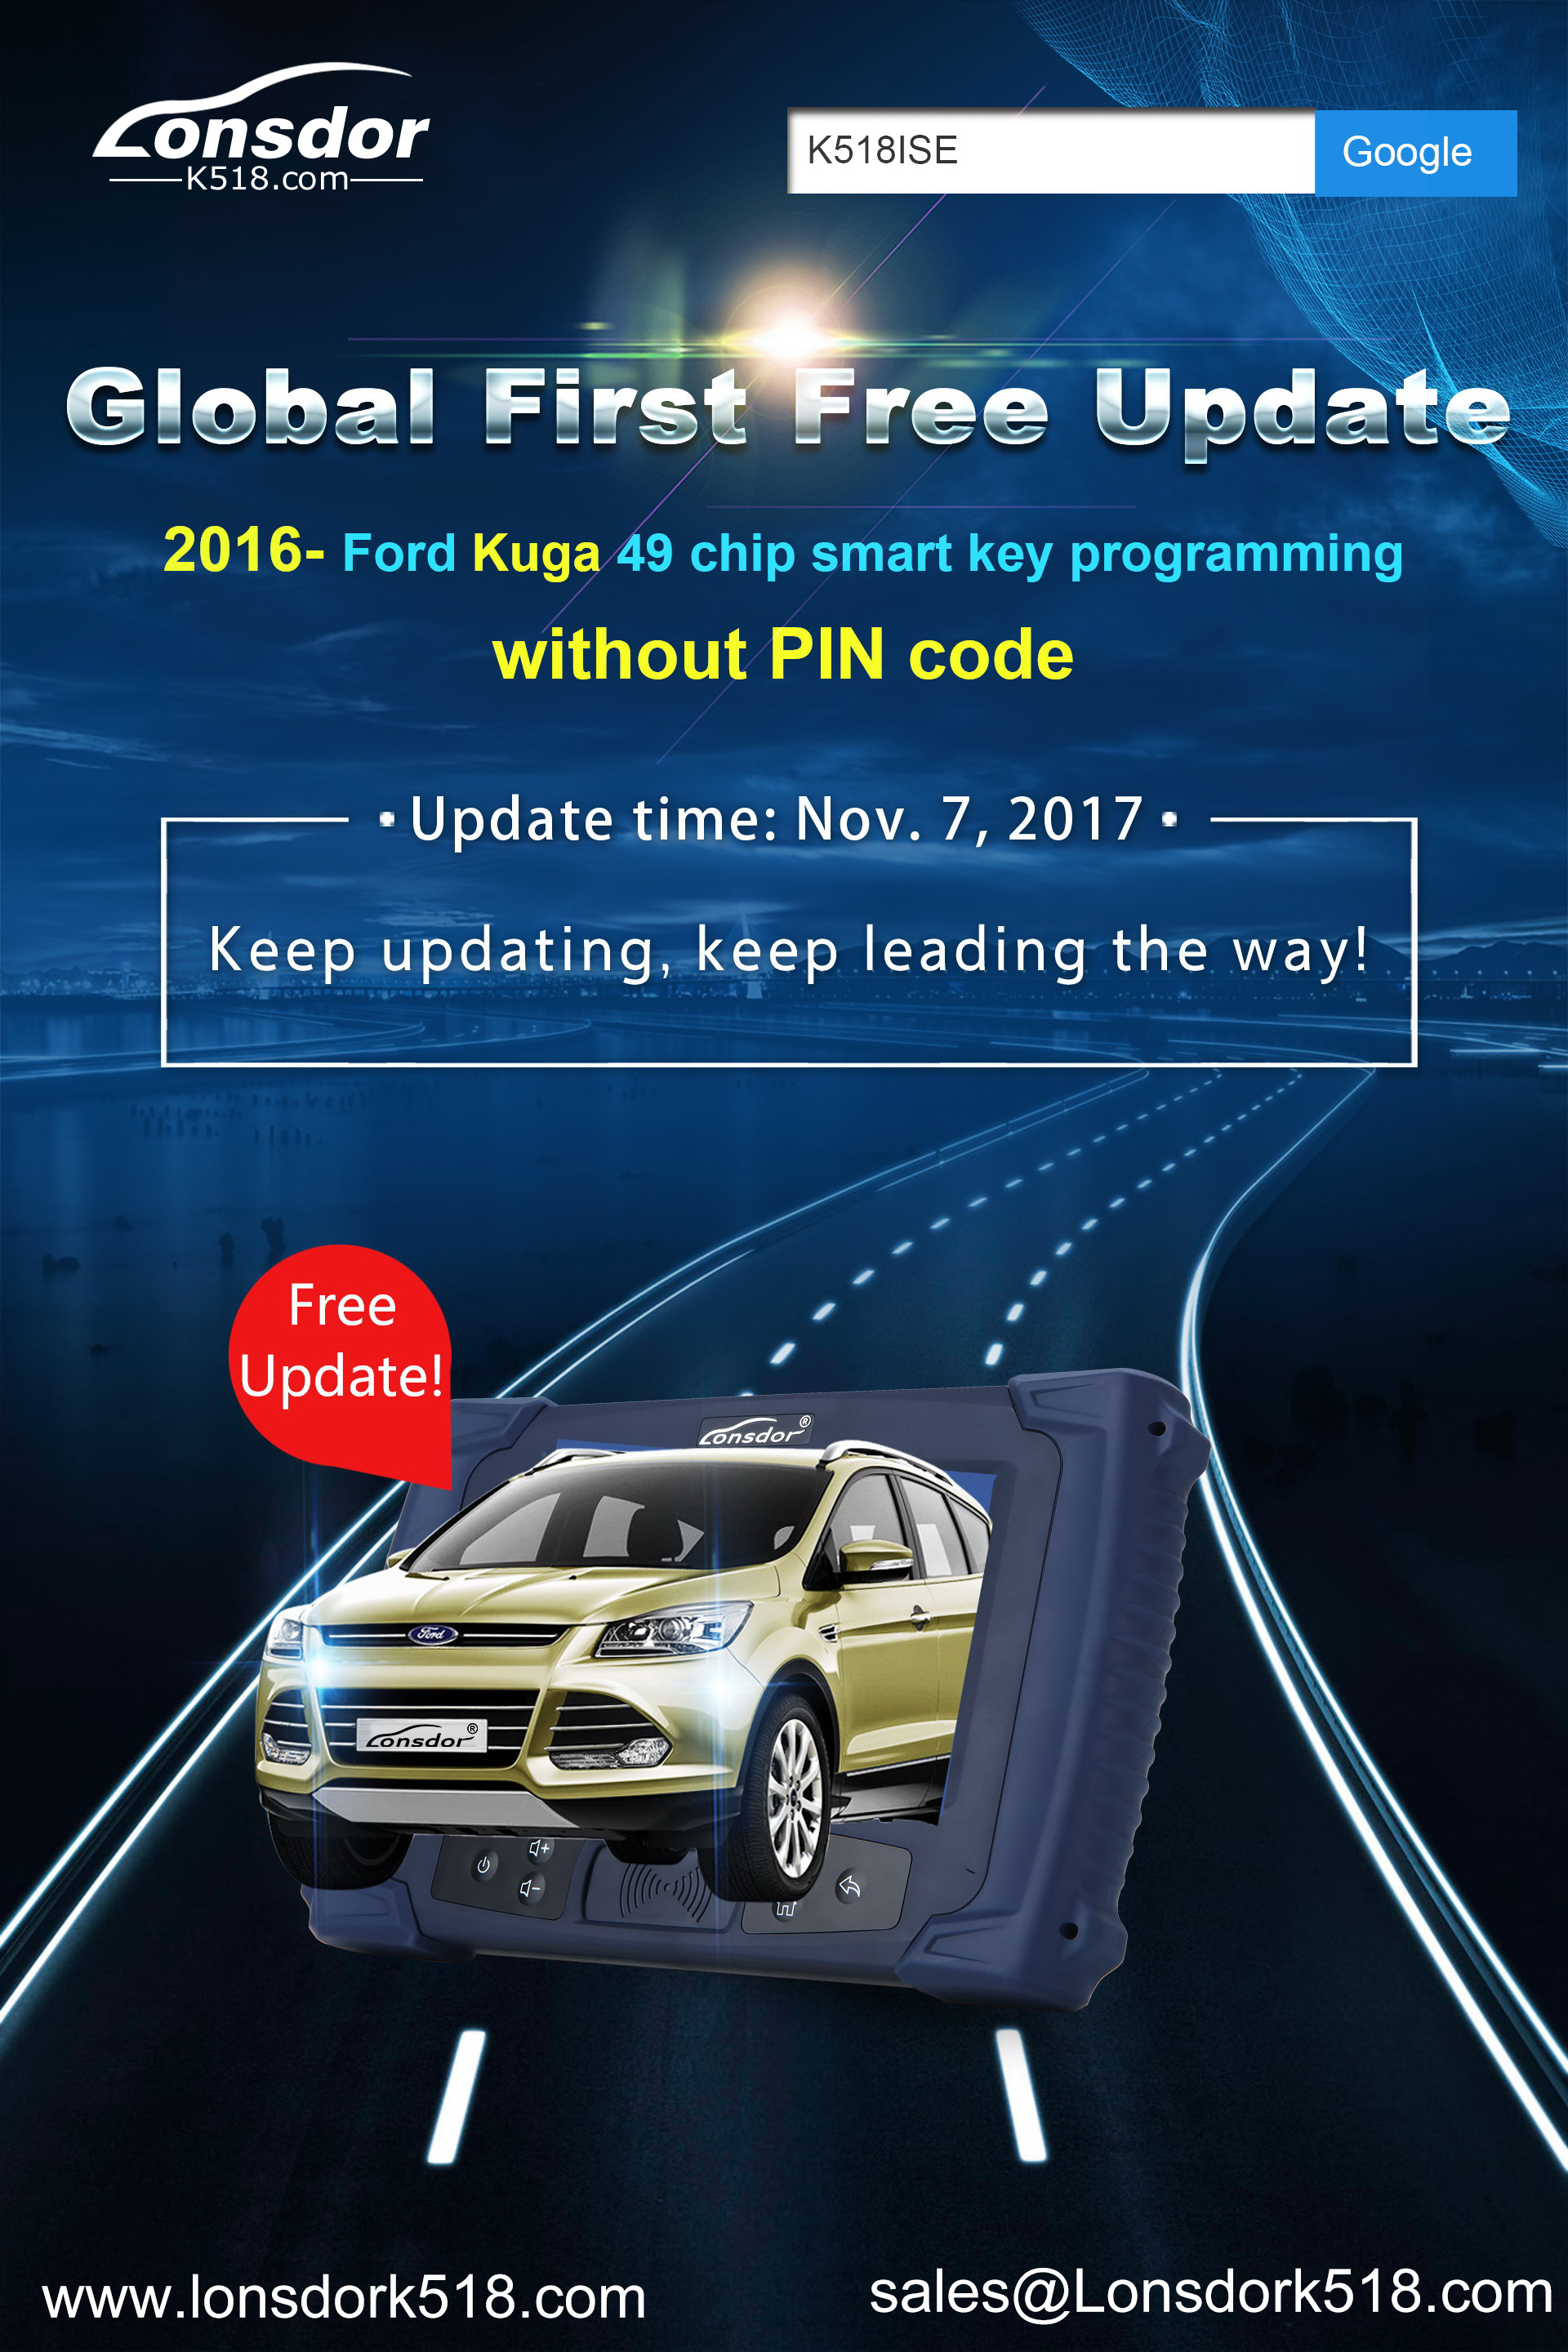 Free update for 2016 Ford Kuga